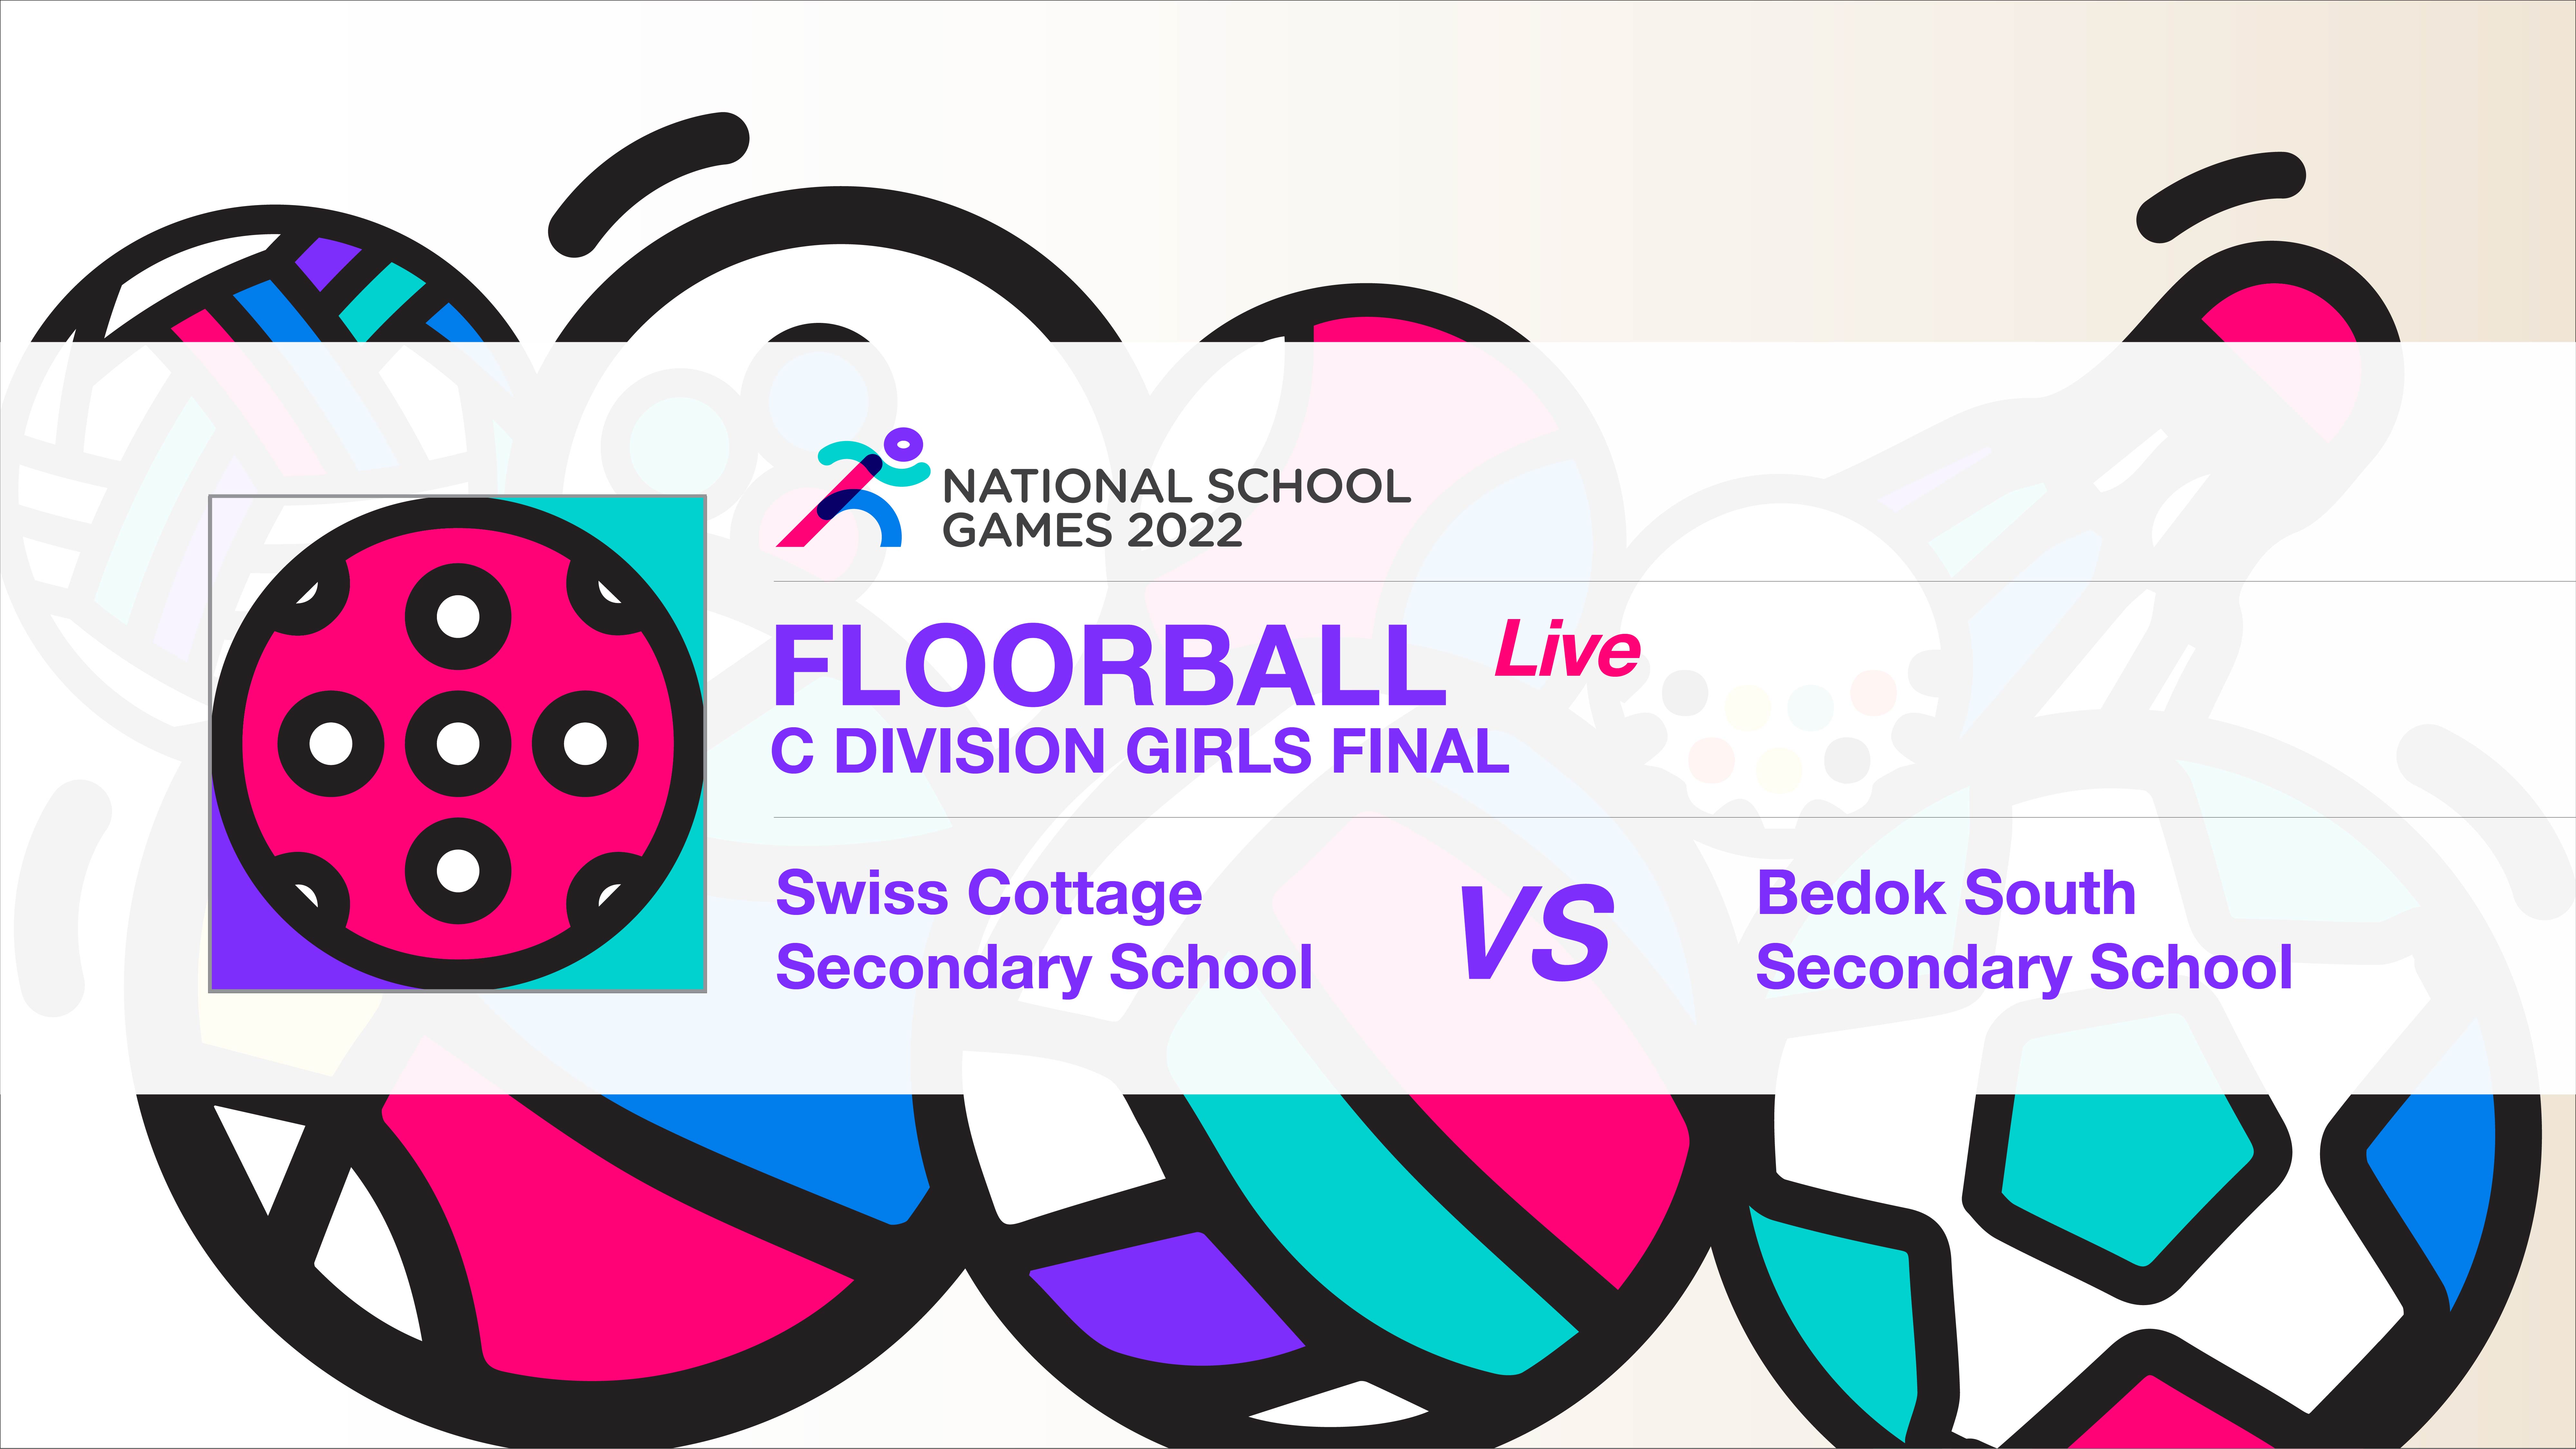 SSSC Floorball National C Division Girls Final | Swiss Cottage Secondary School vs Bedok South Secondary School